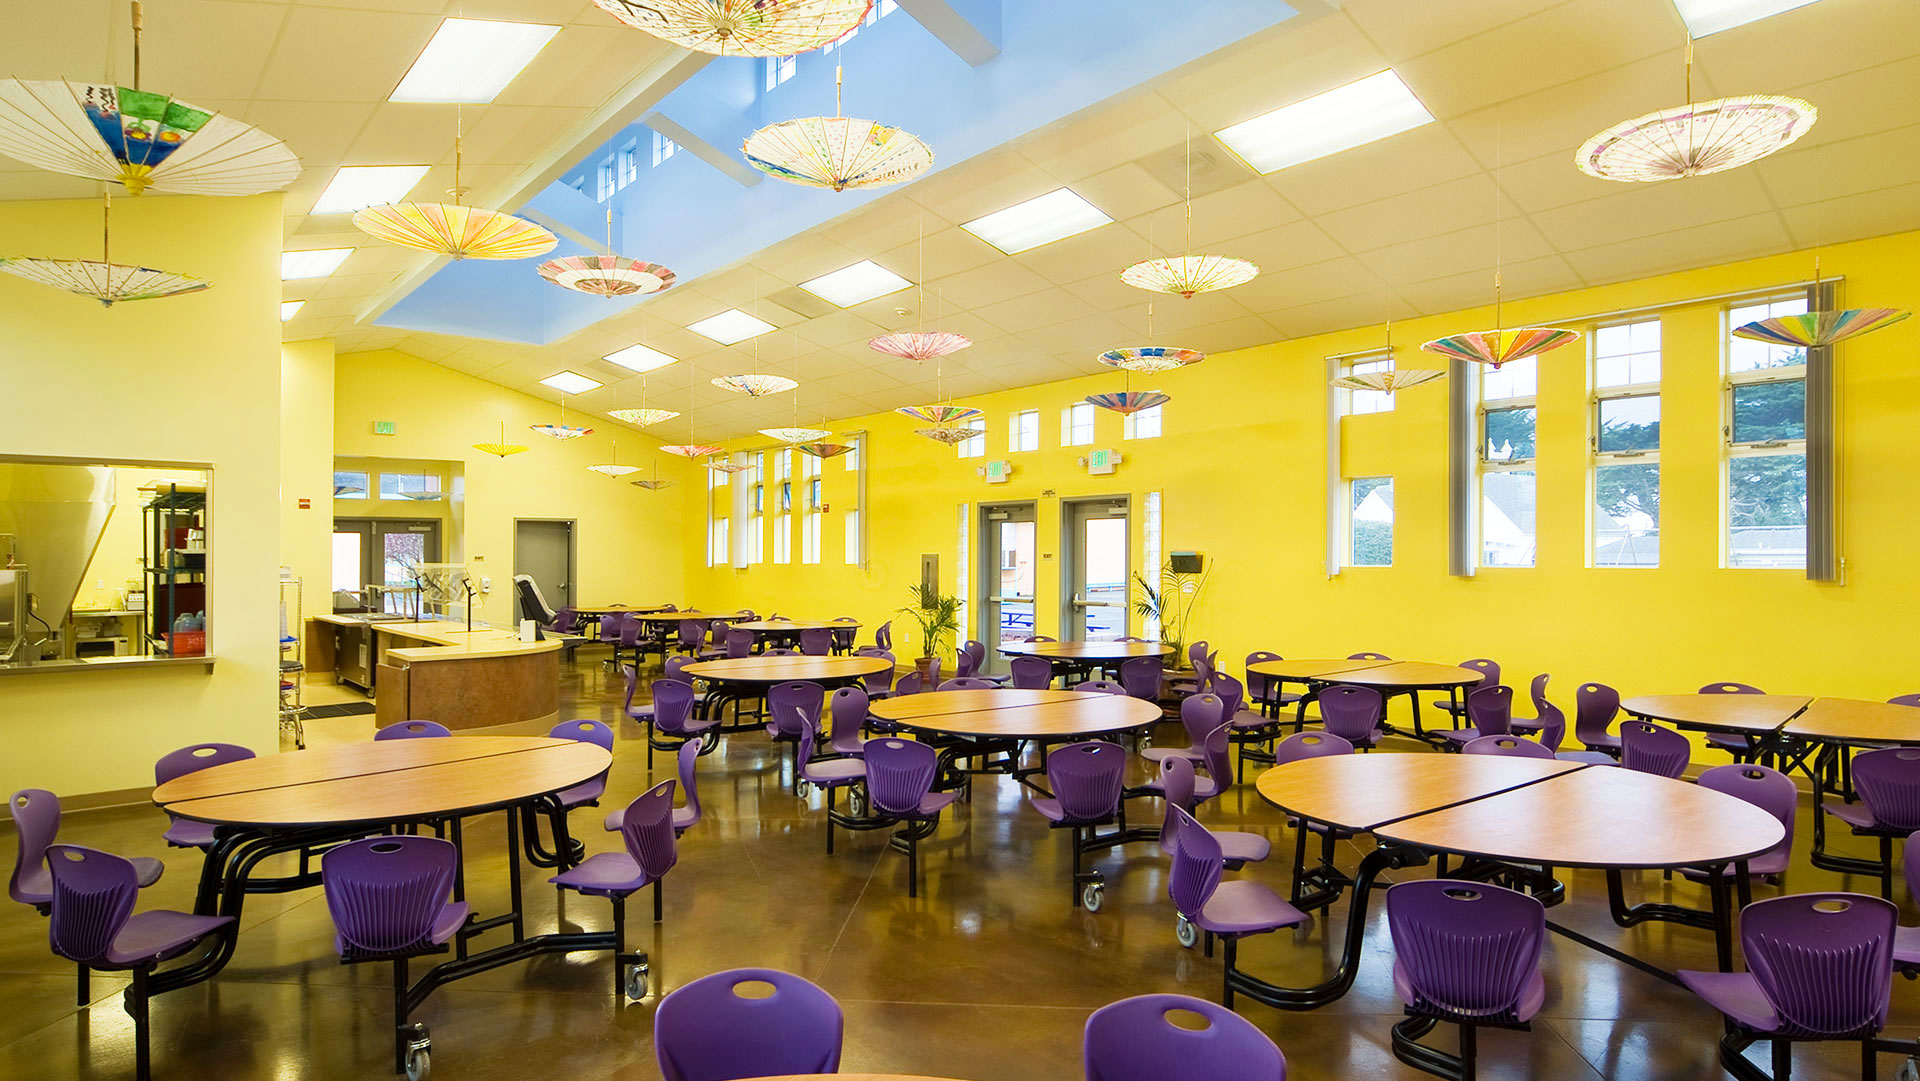 Interior of cafeteria, with bright yellow walls, circular tables and purple chairs.